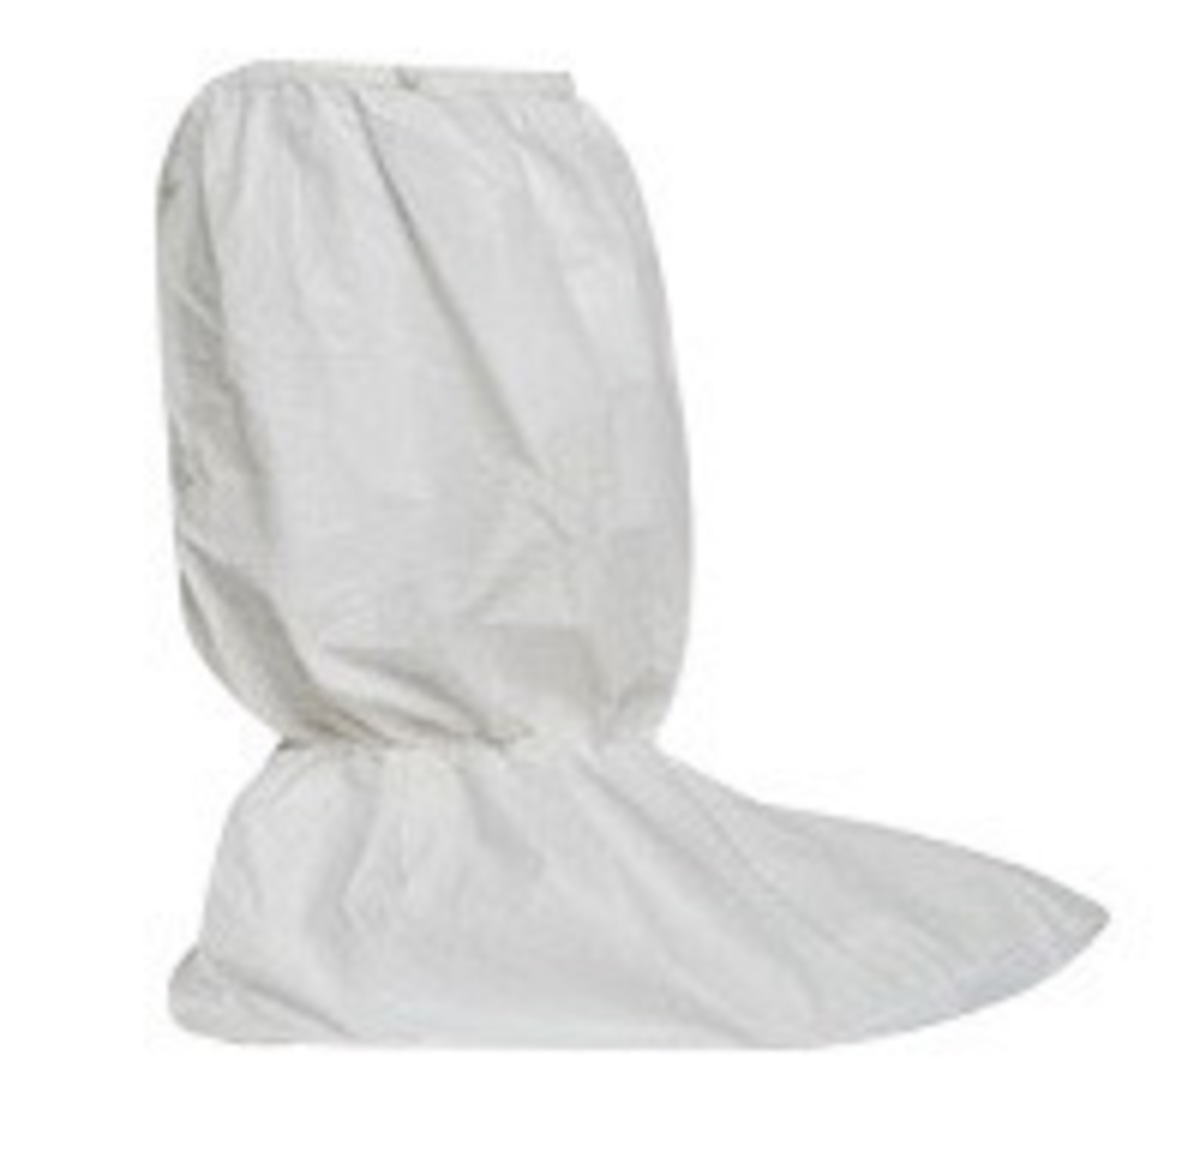 DuPont™ Large White ProClean® Polypropylene Disposable Shoe Cover (Availability restrictions apply.)